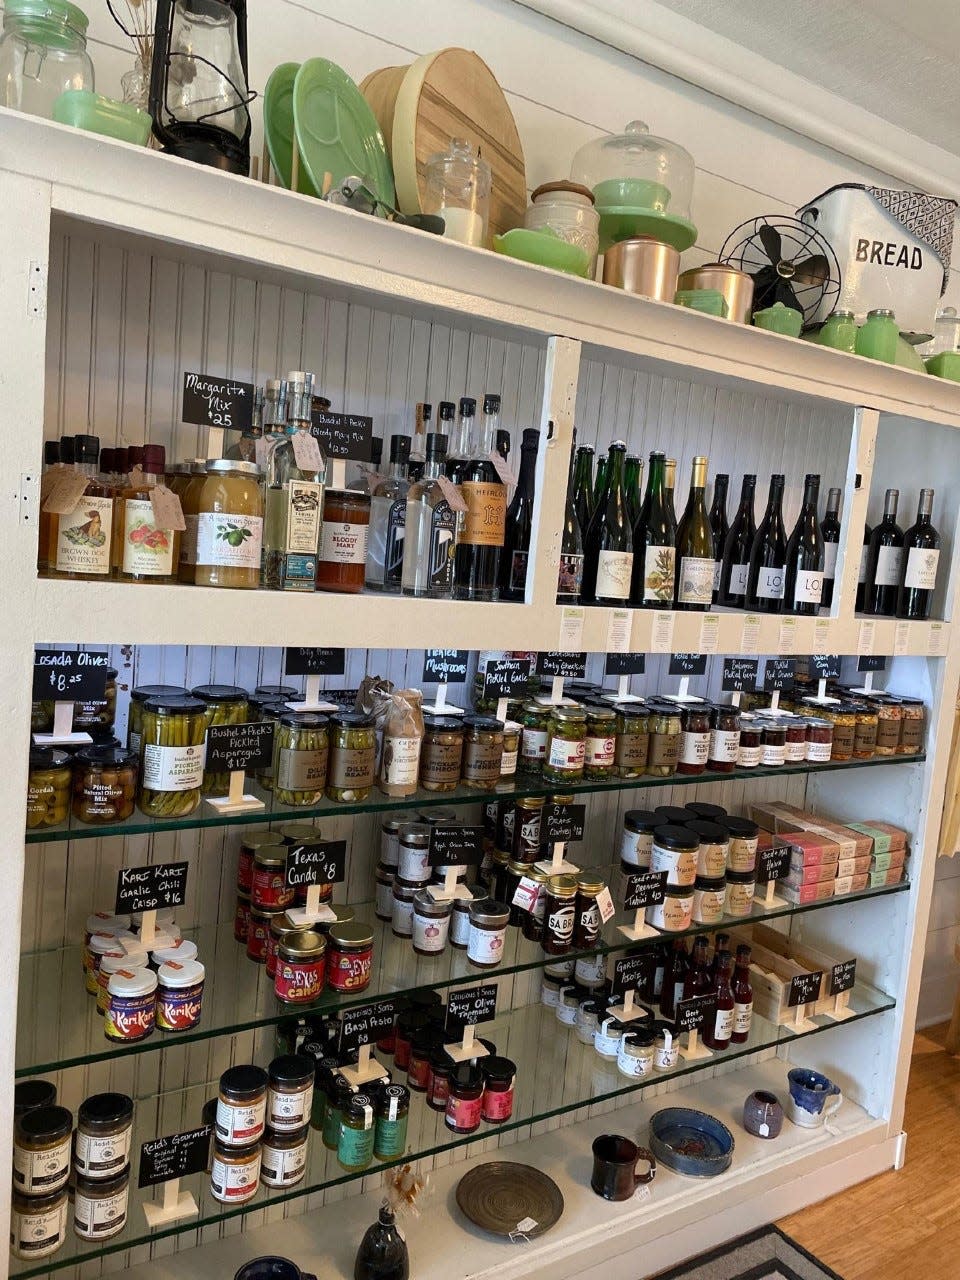 Shelves at Frannie's Market are stocked with everything you need for a top-notch meal or gathering.